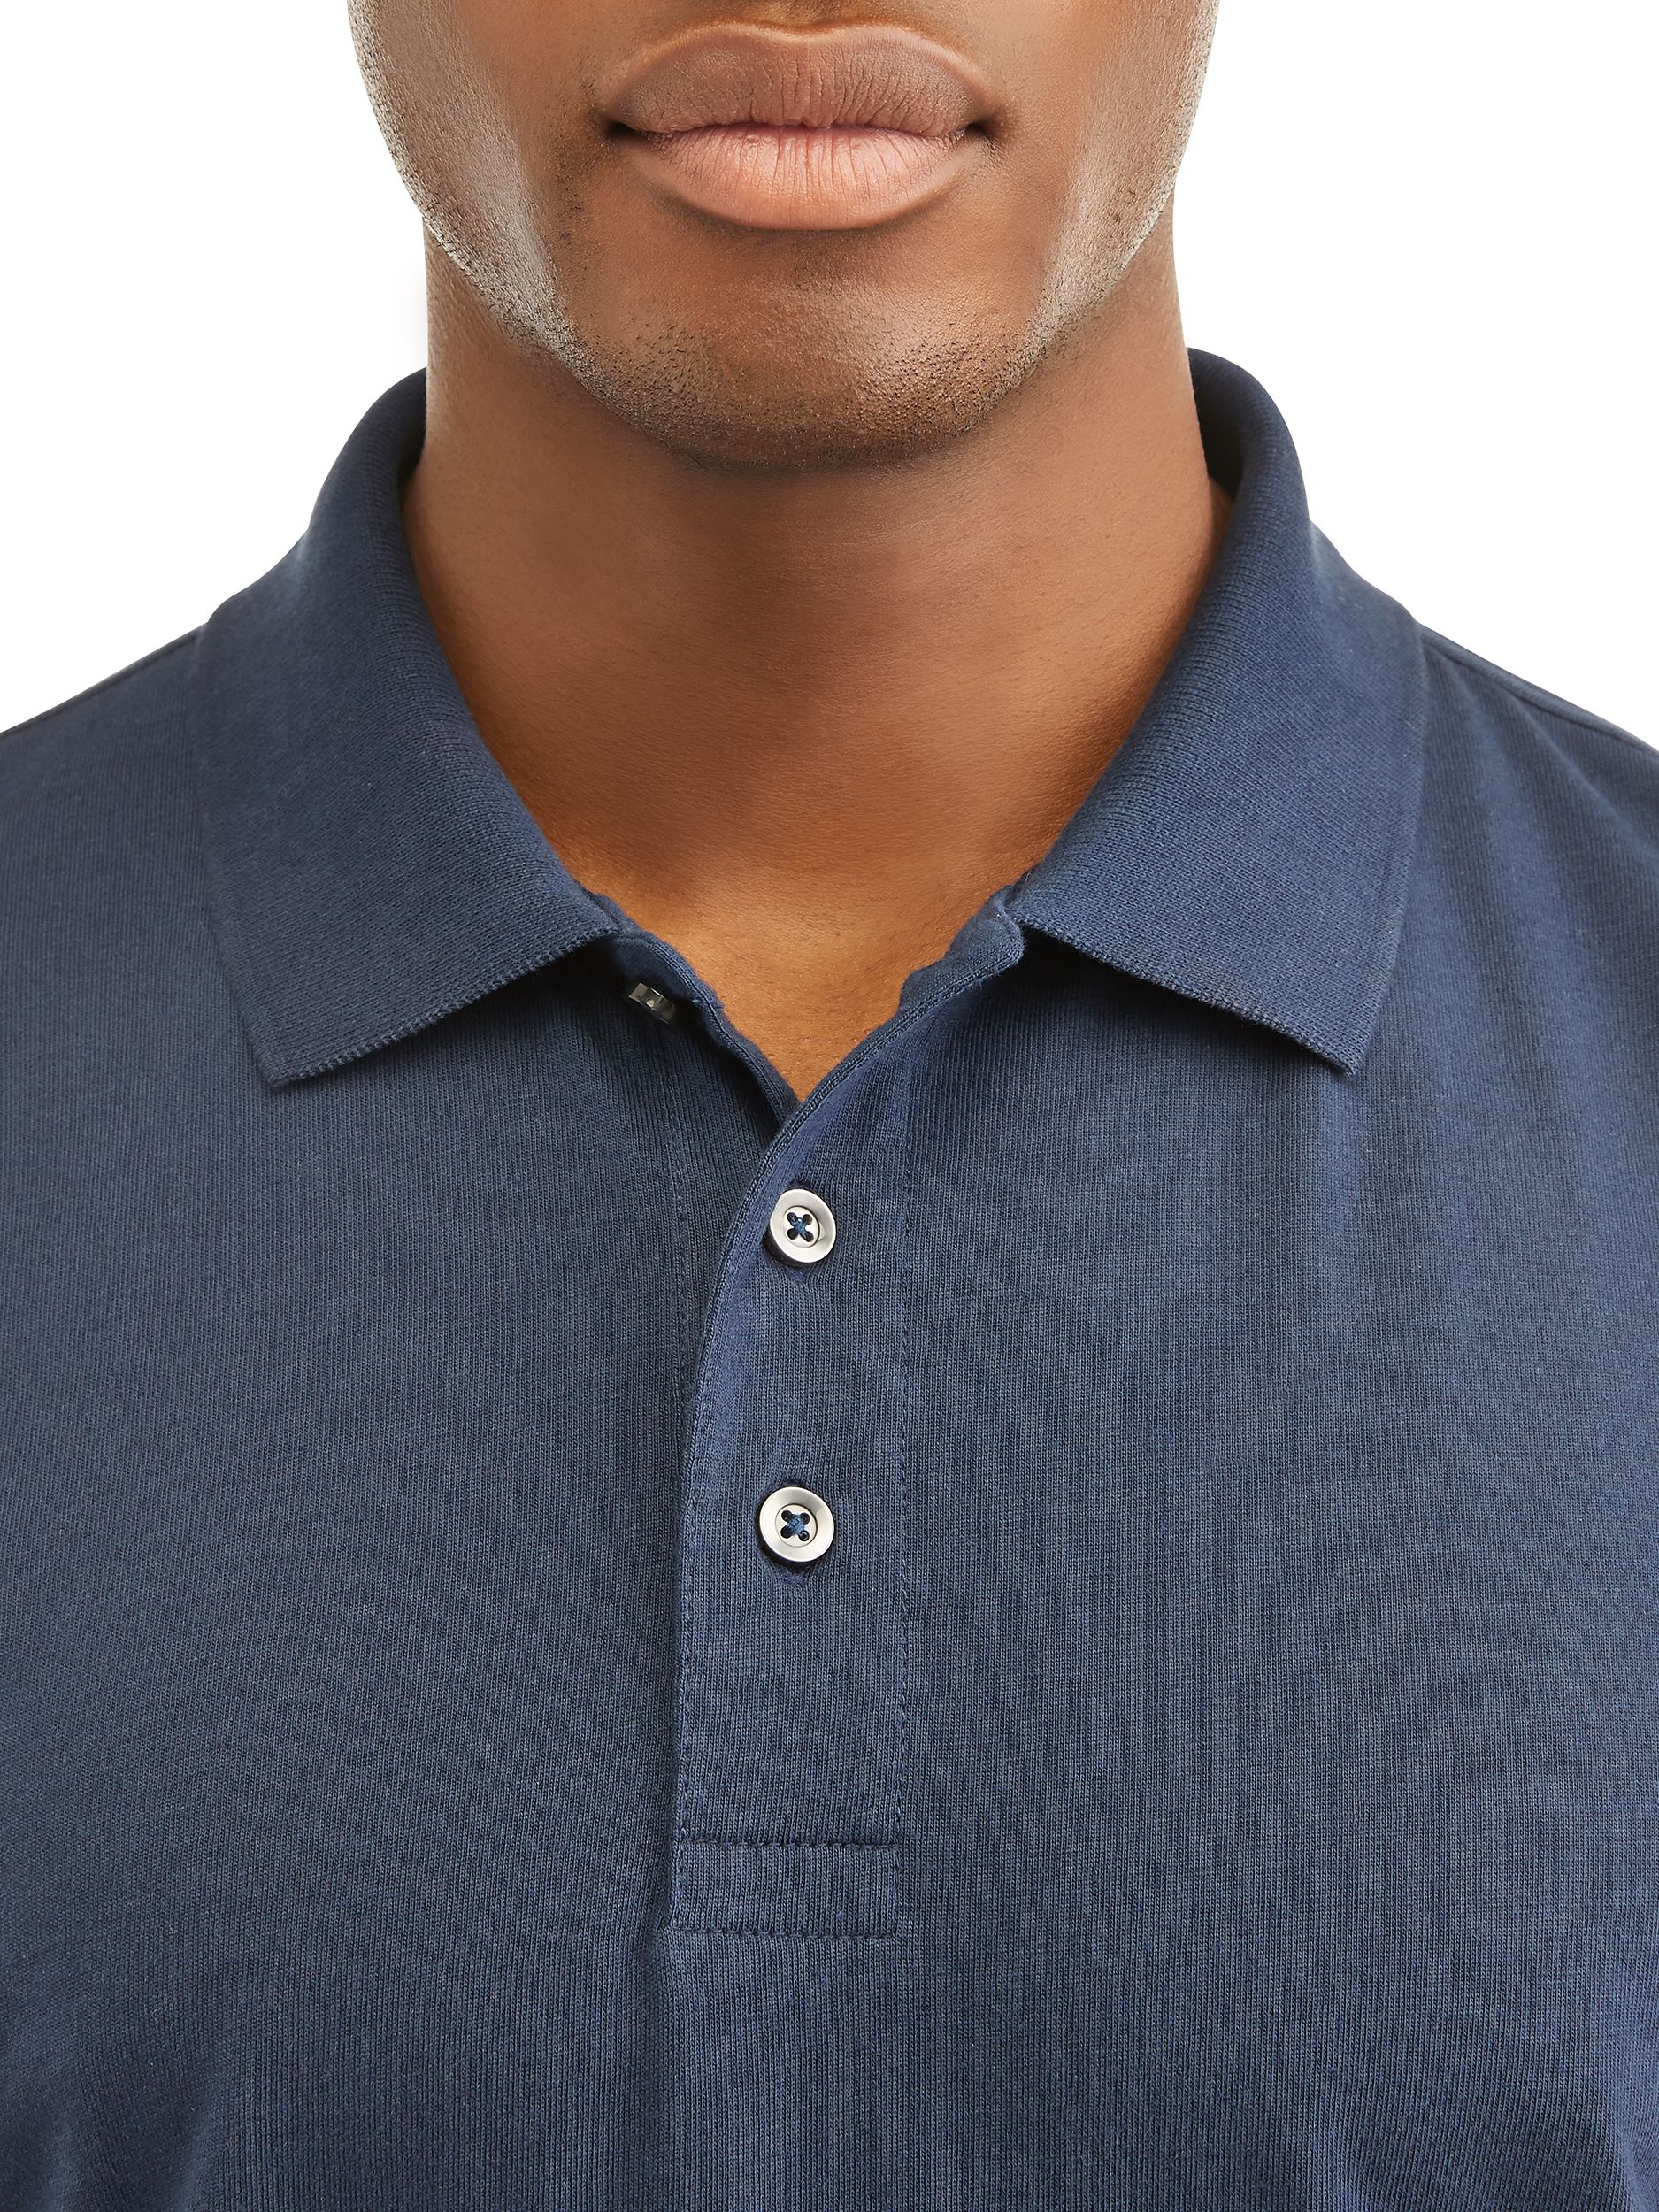 George Men's Short Sleeve Solid Polo Shirt - image 3 of 4